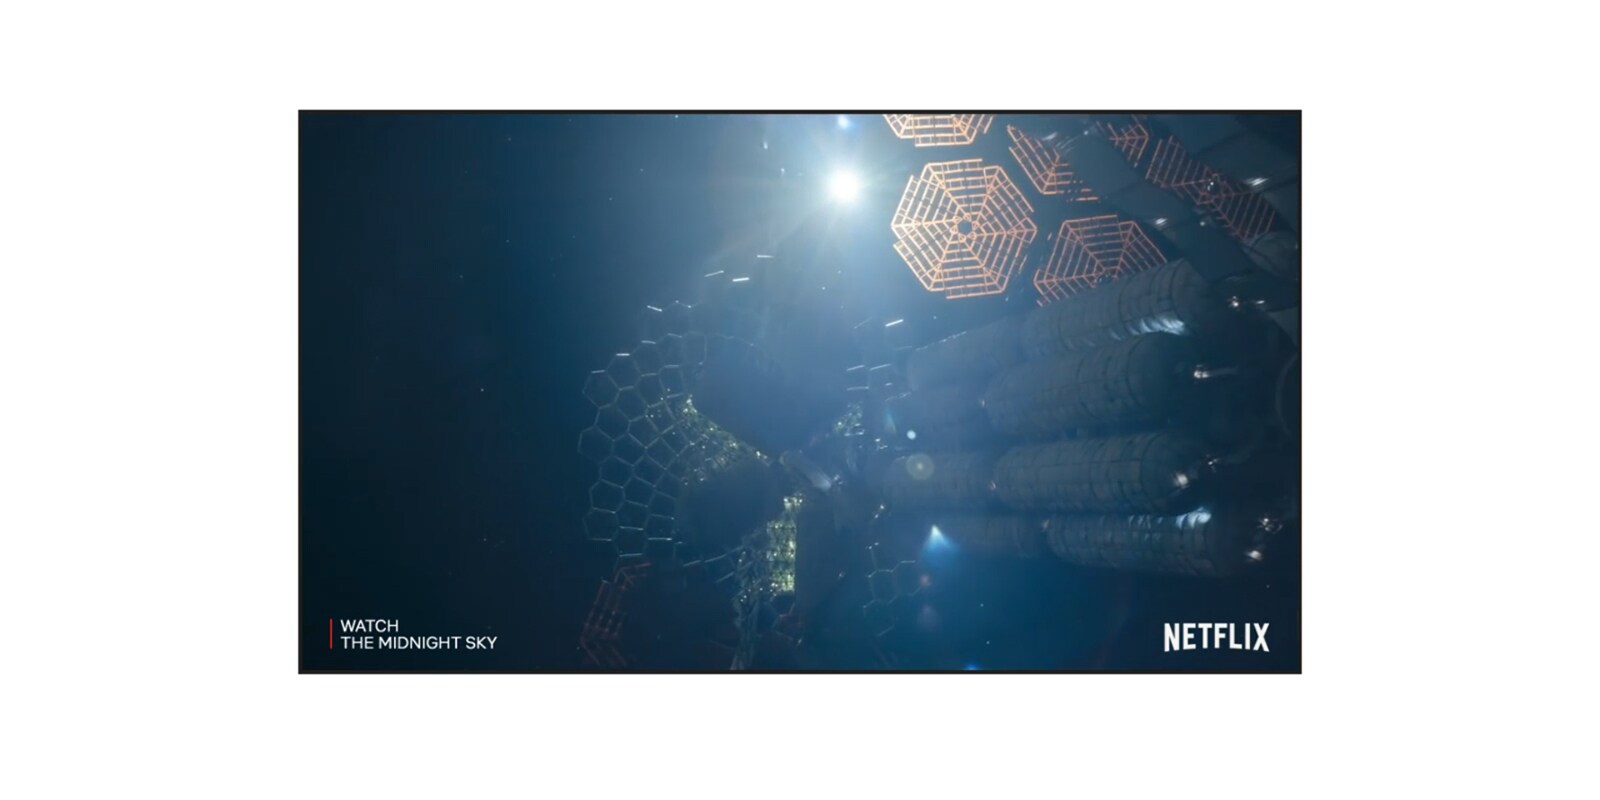 A TV screen showing a trailer of The Midnight Sky on Netflix (play the video).